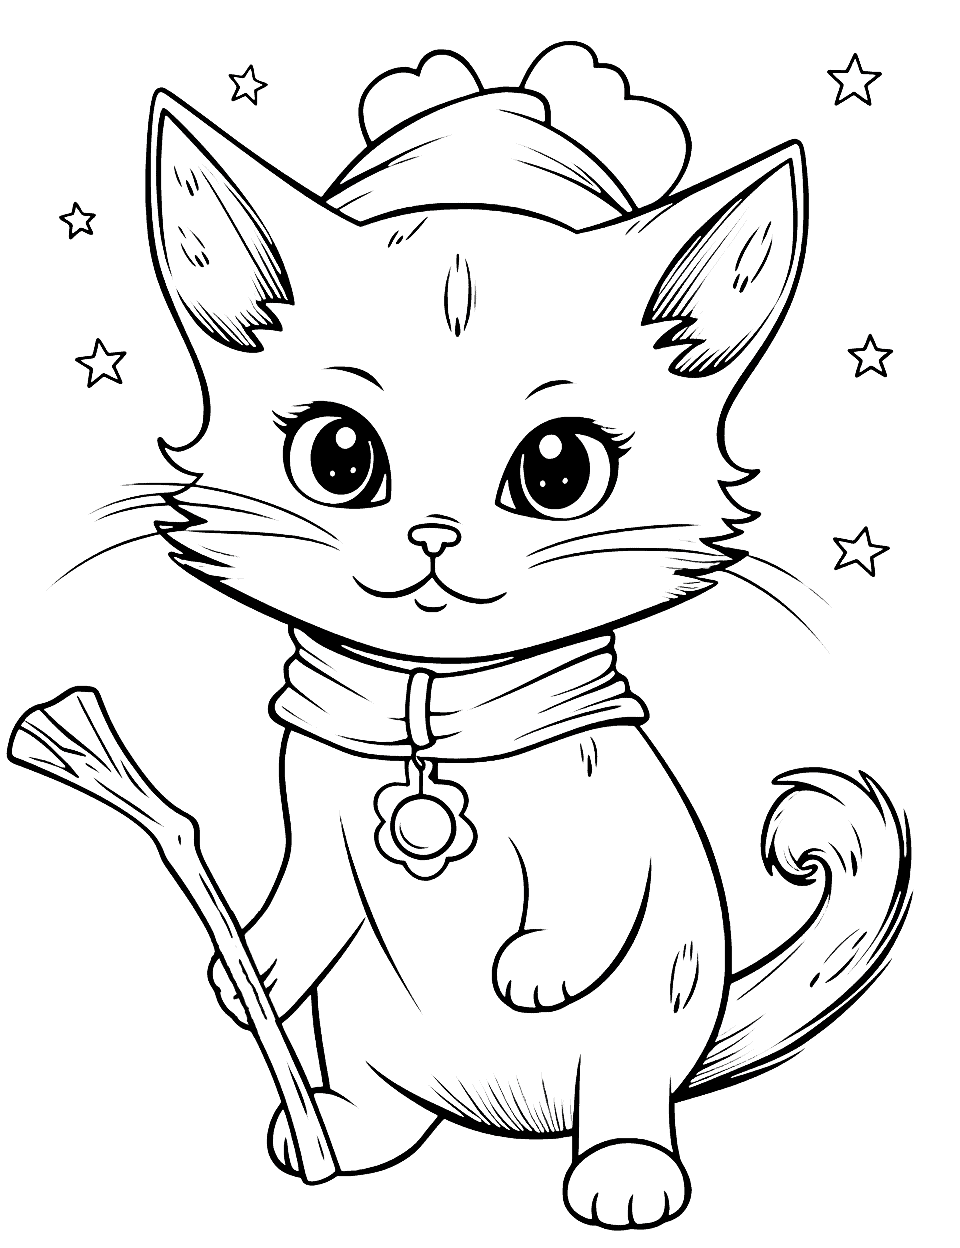 Mystical Cat With a Magical Wand Coloring Page - A cat casting enchanting spells with a magical wand.